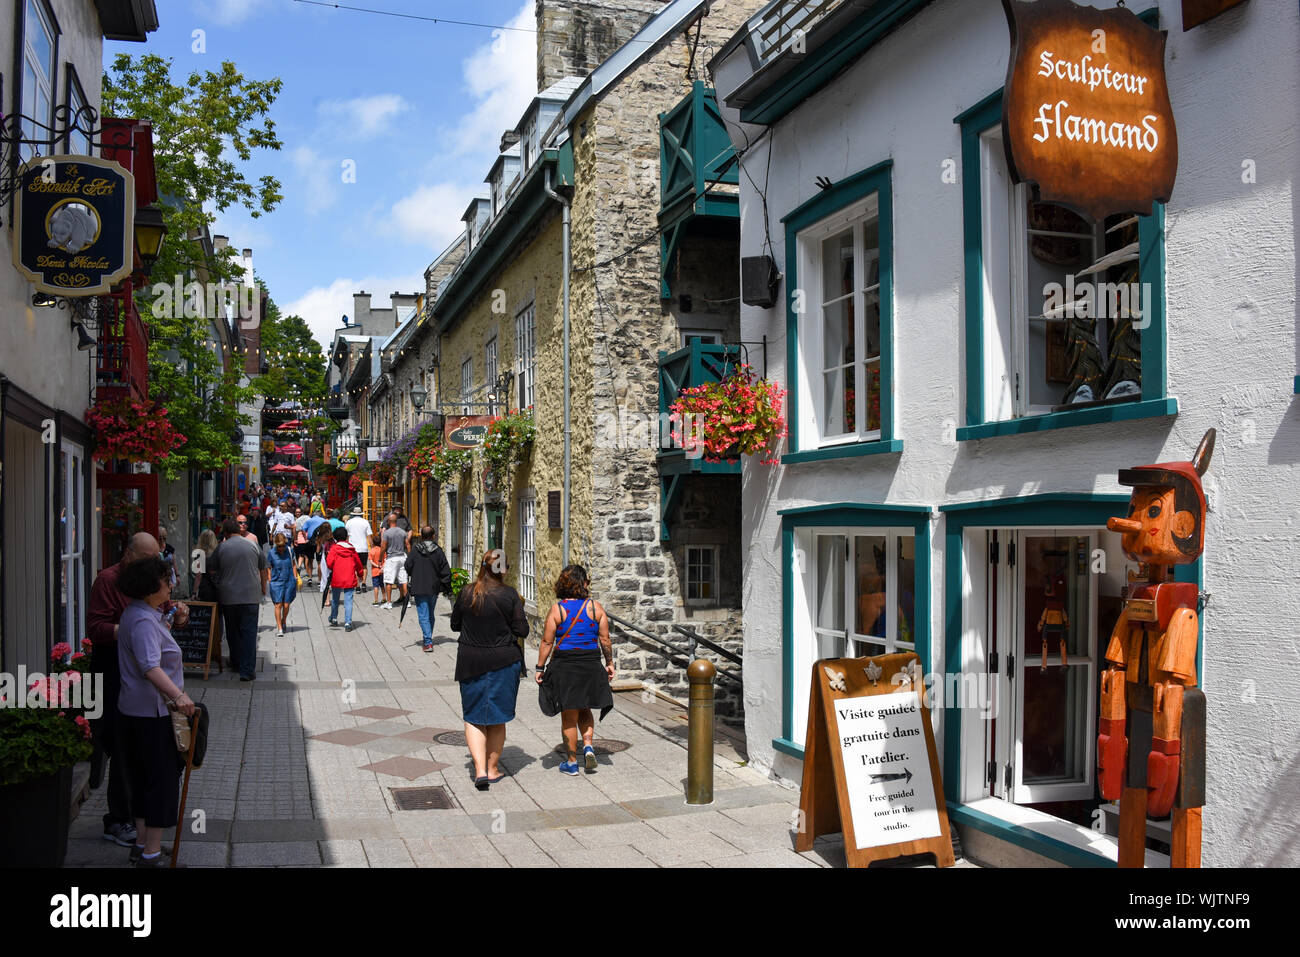 Quebec City, Canada - August 12, 2019: A crowd of people on the busy Quartier du Petit Champlain in old Quebec City.  It is claimed to be the oldest c Stock Photo